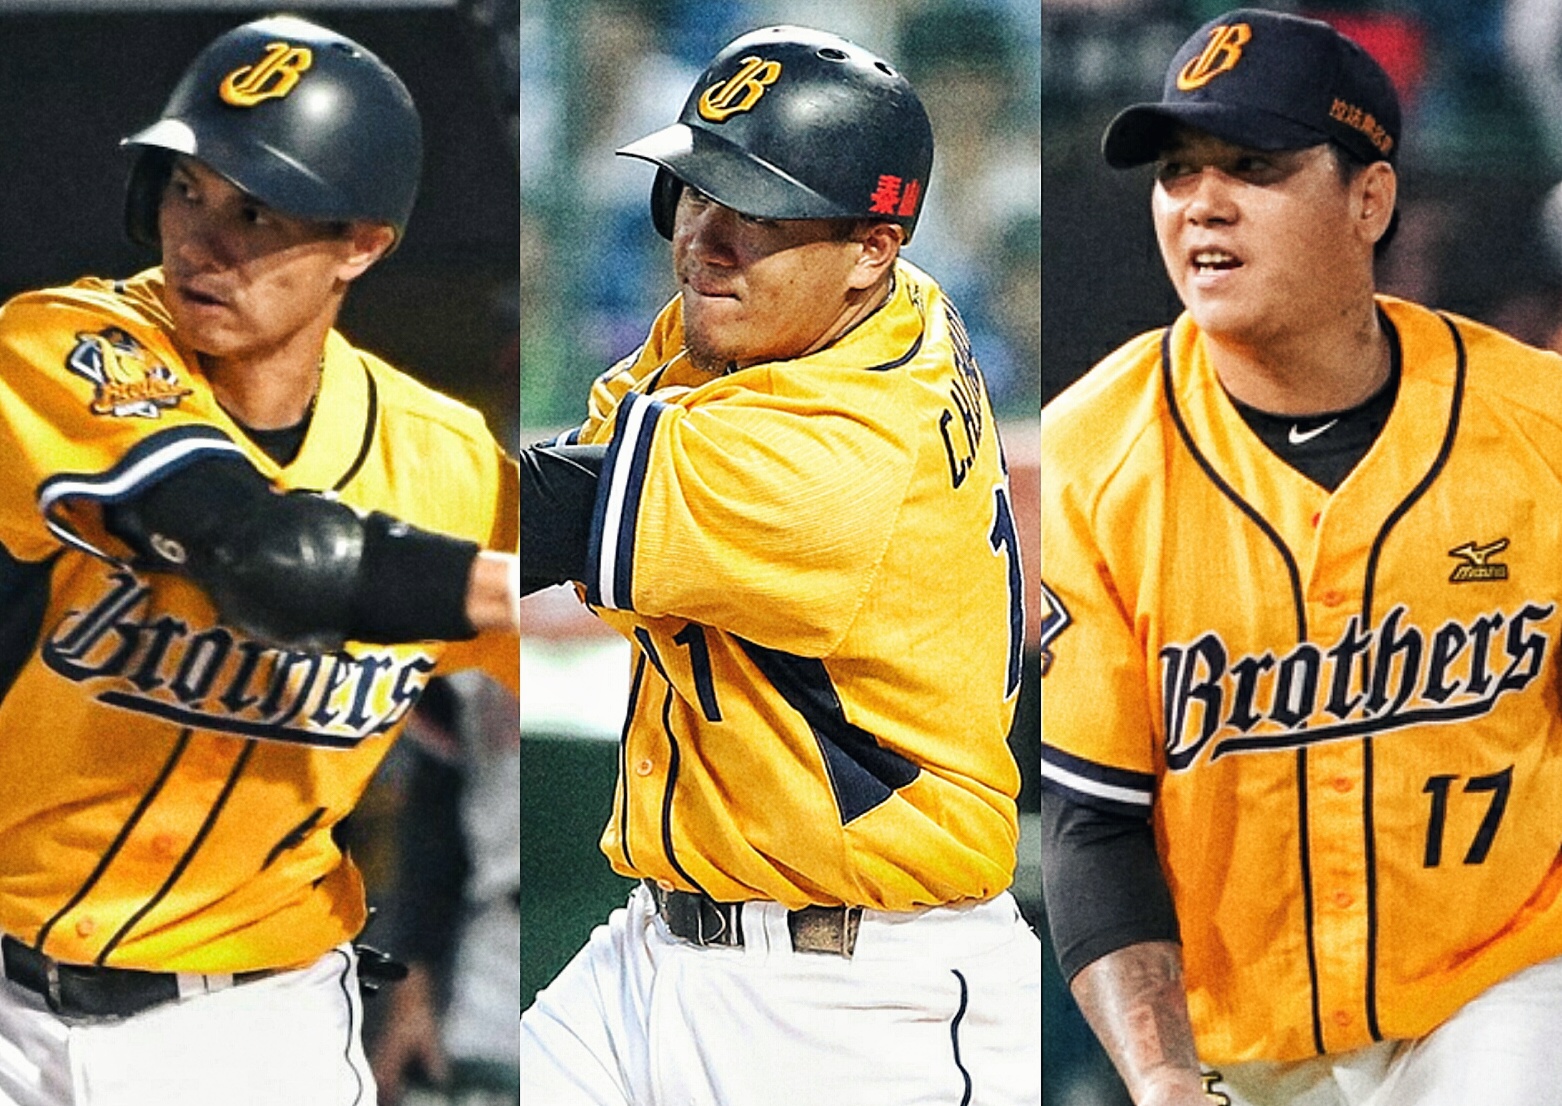 Chinatrust Brothers release 7 core players after 2017 season